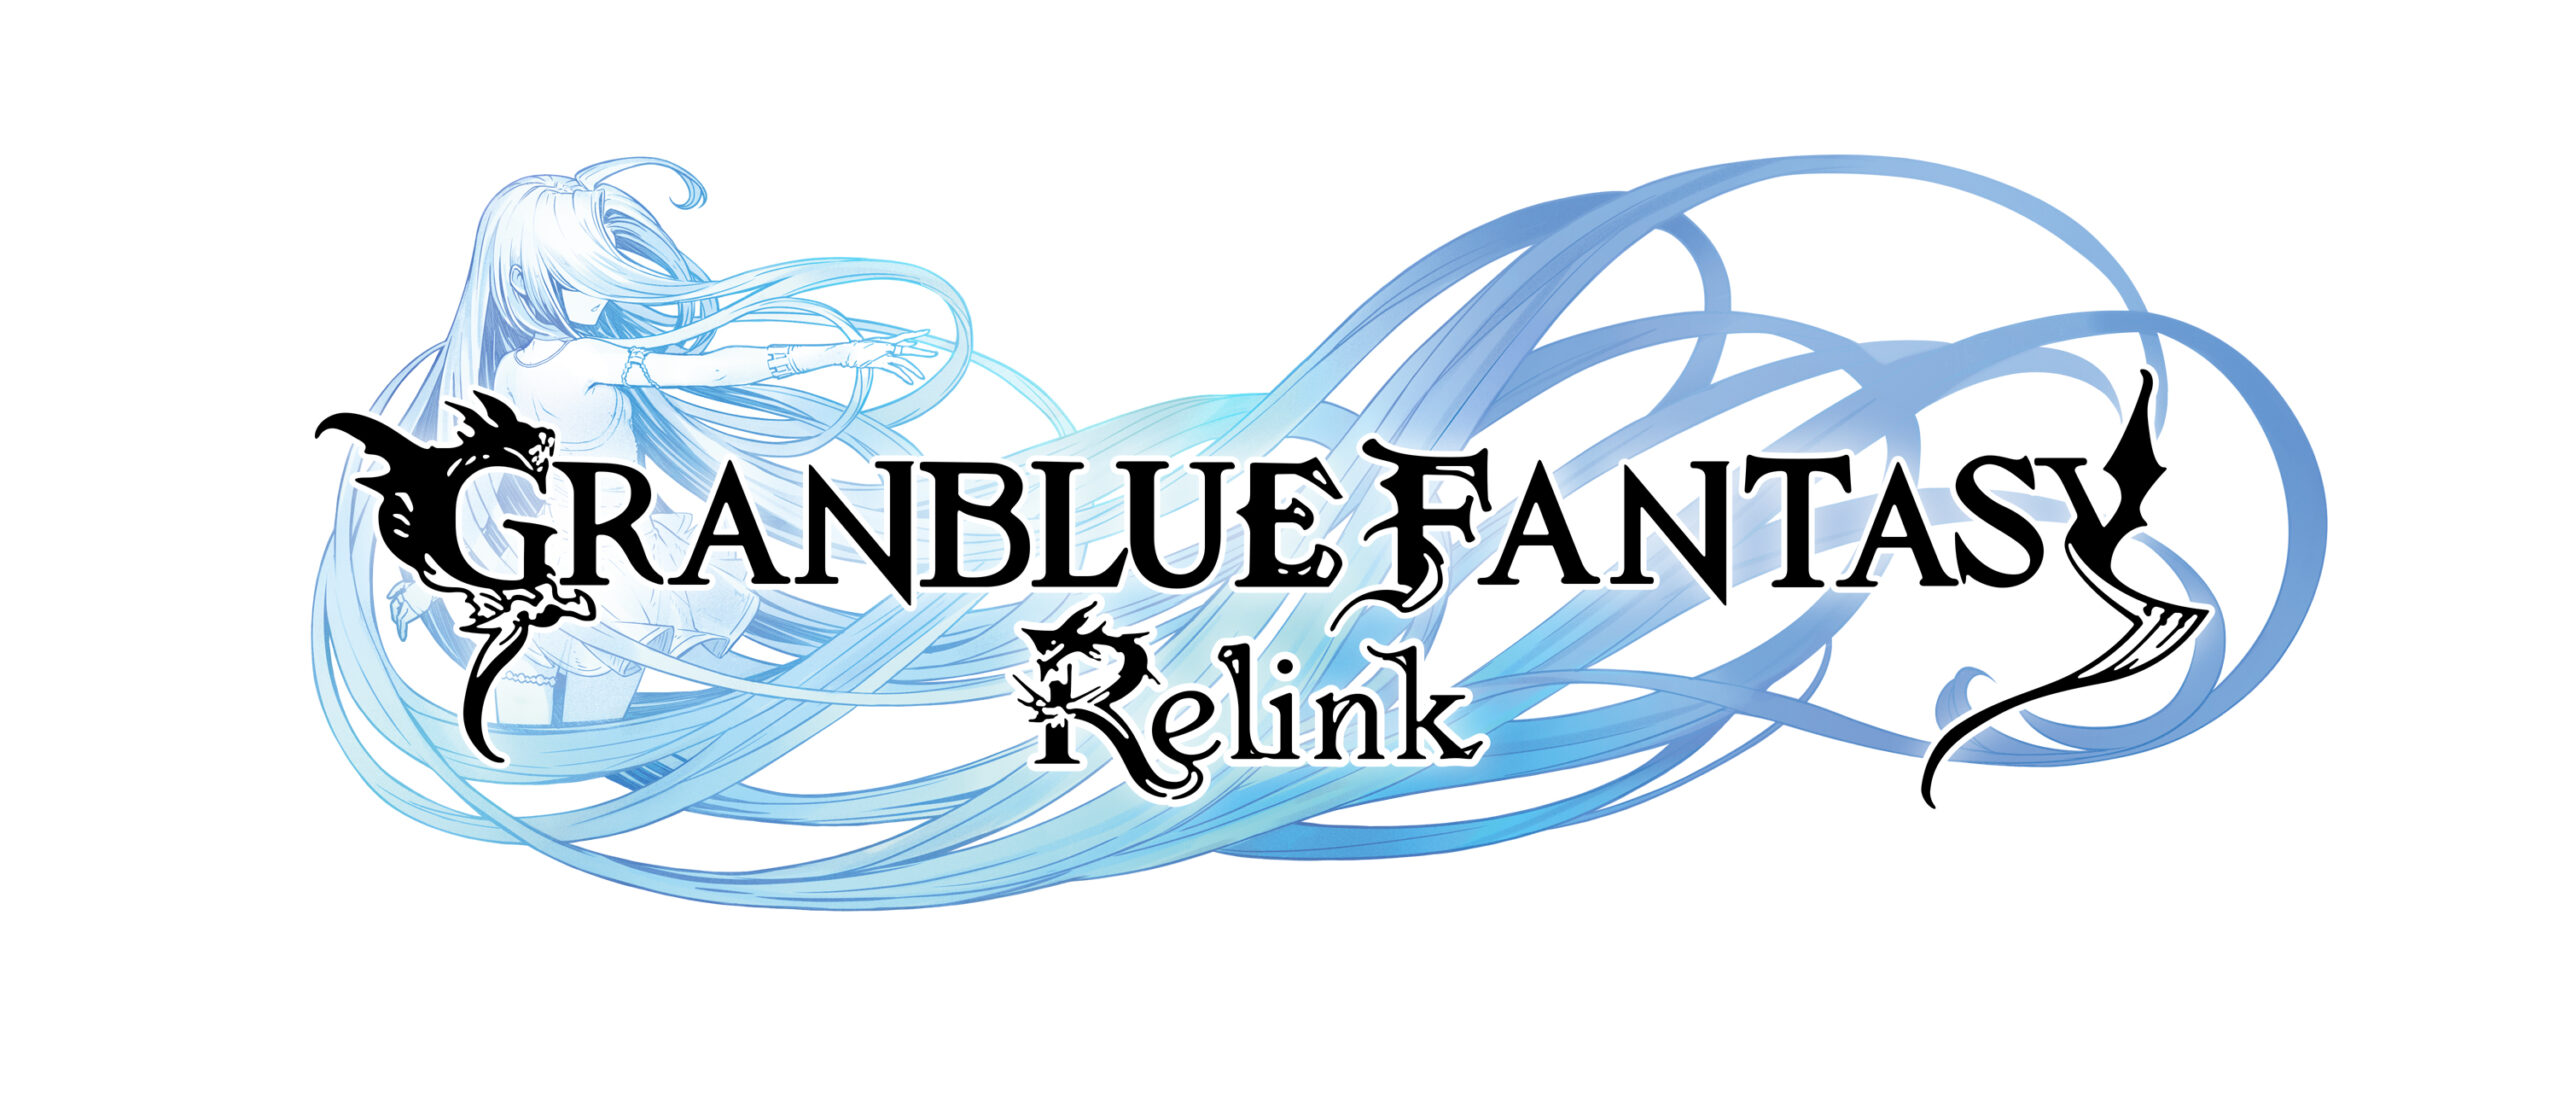 Step-Forth-Beyond-the-Blue-Granblue-Fantasy-Relink-Version-1.1.1-Out-Now-cover